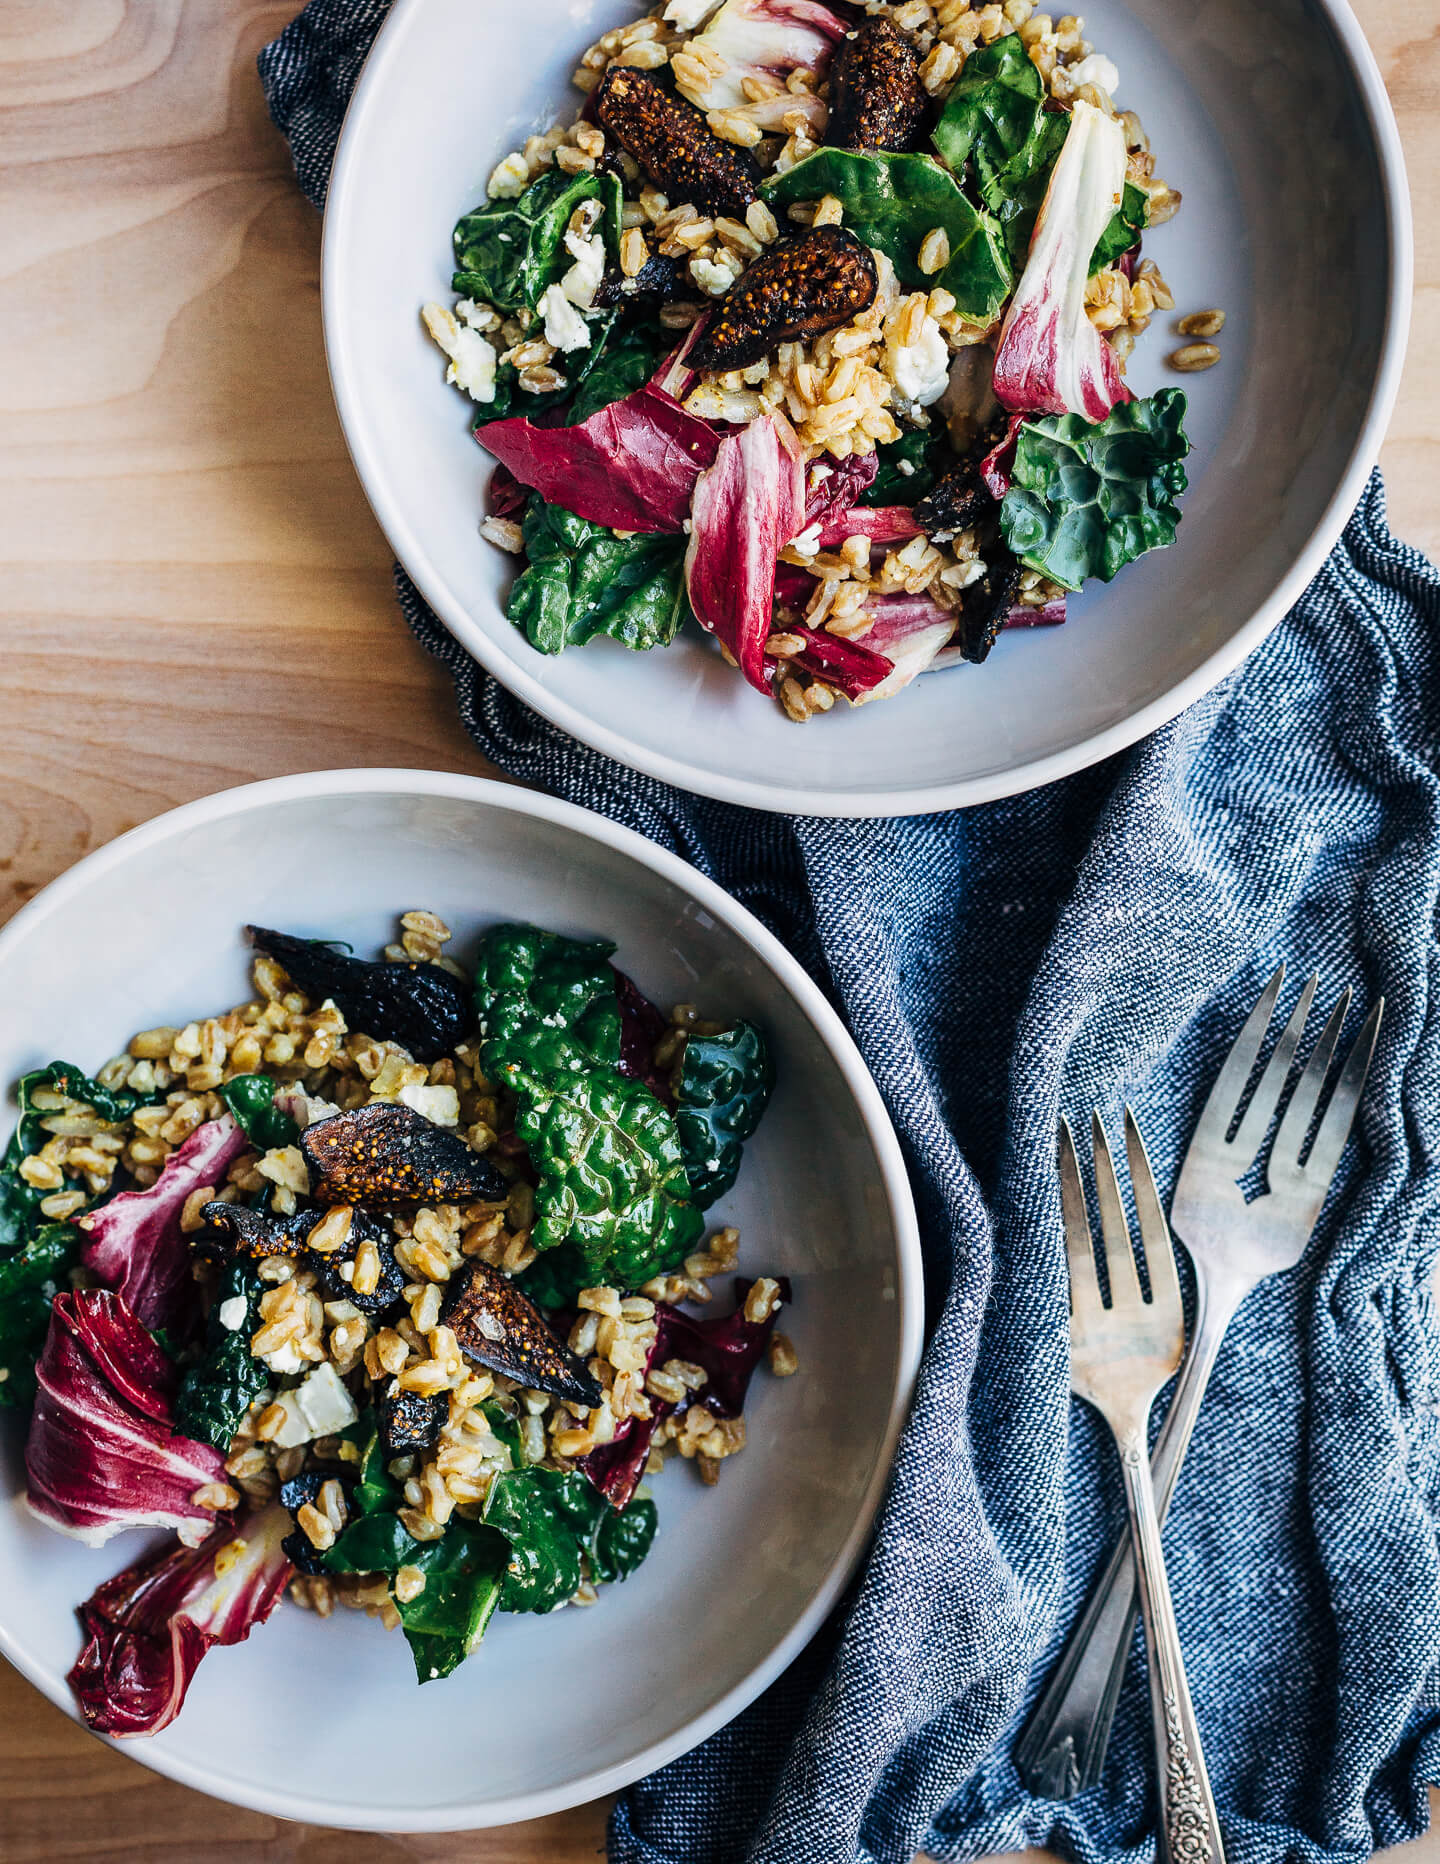 A dried California Mission fig and whole grain farro salad that's incredibly versatile and hardy. It features kale and radicchio leaves tossed with warm farro and a punchy turmeric vinaigrette. The salad is topped off with crumbled feta and deliciously toothsome dried California Mission figs.